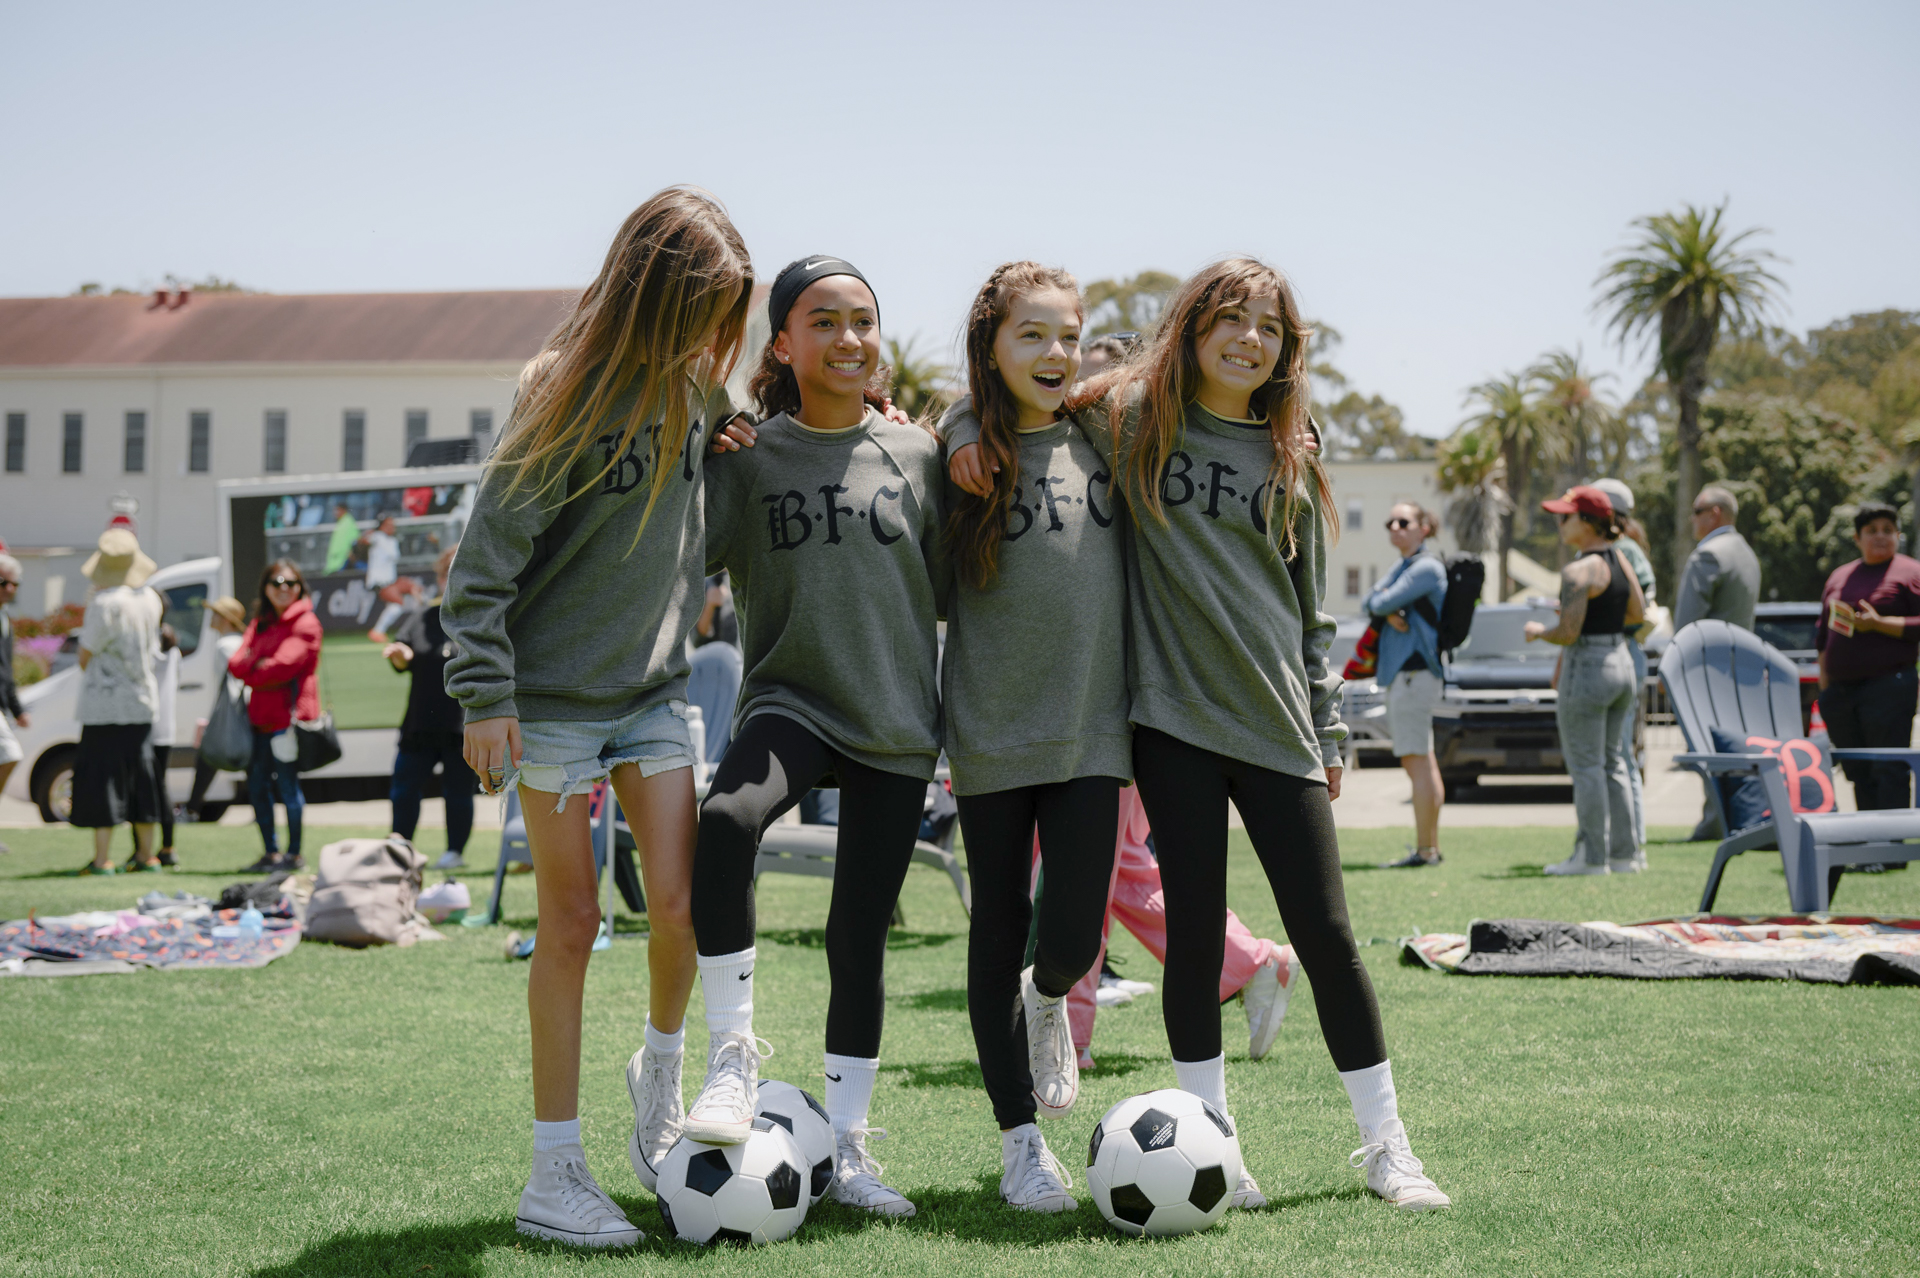 Four girls pose for a photo with two soccer balls and people in the background.